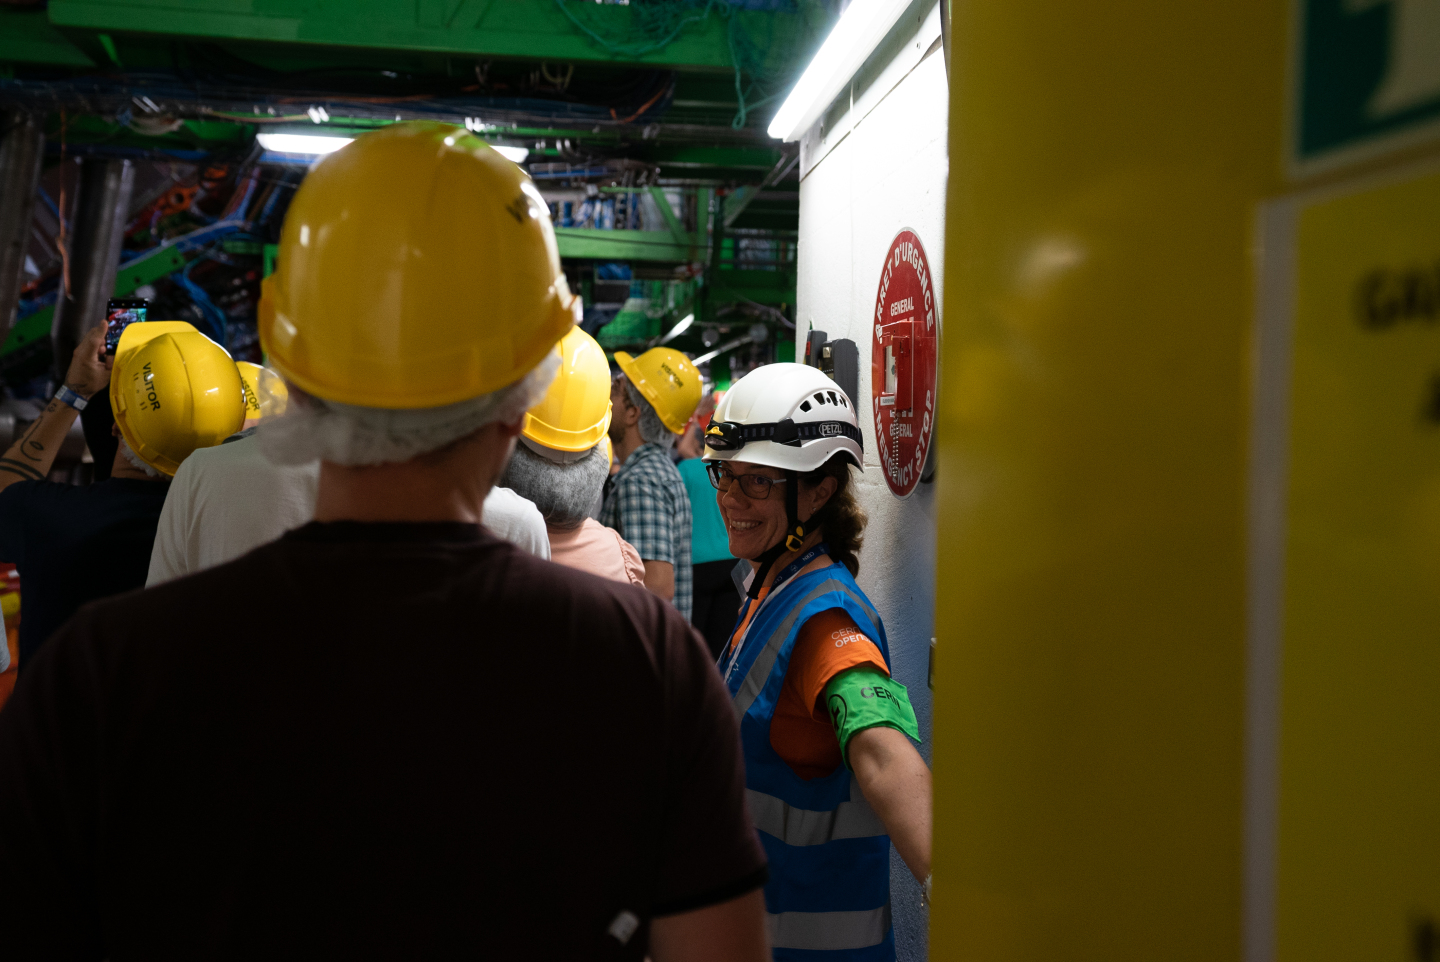 cern guided tour price